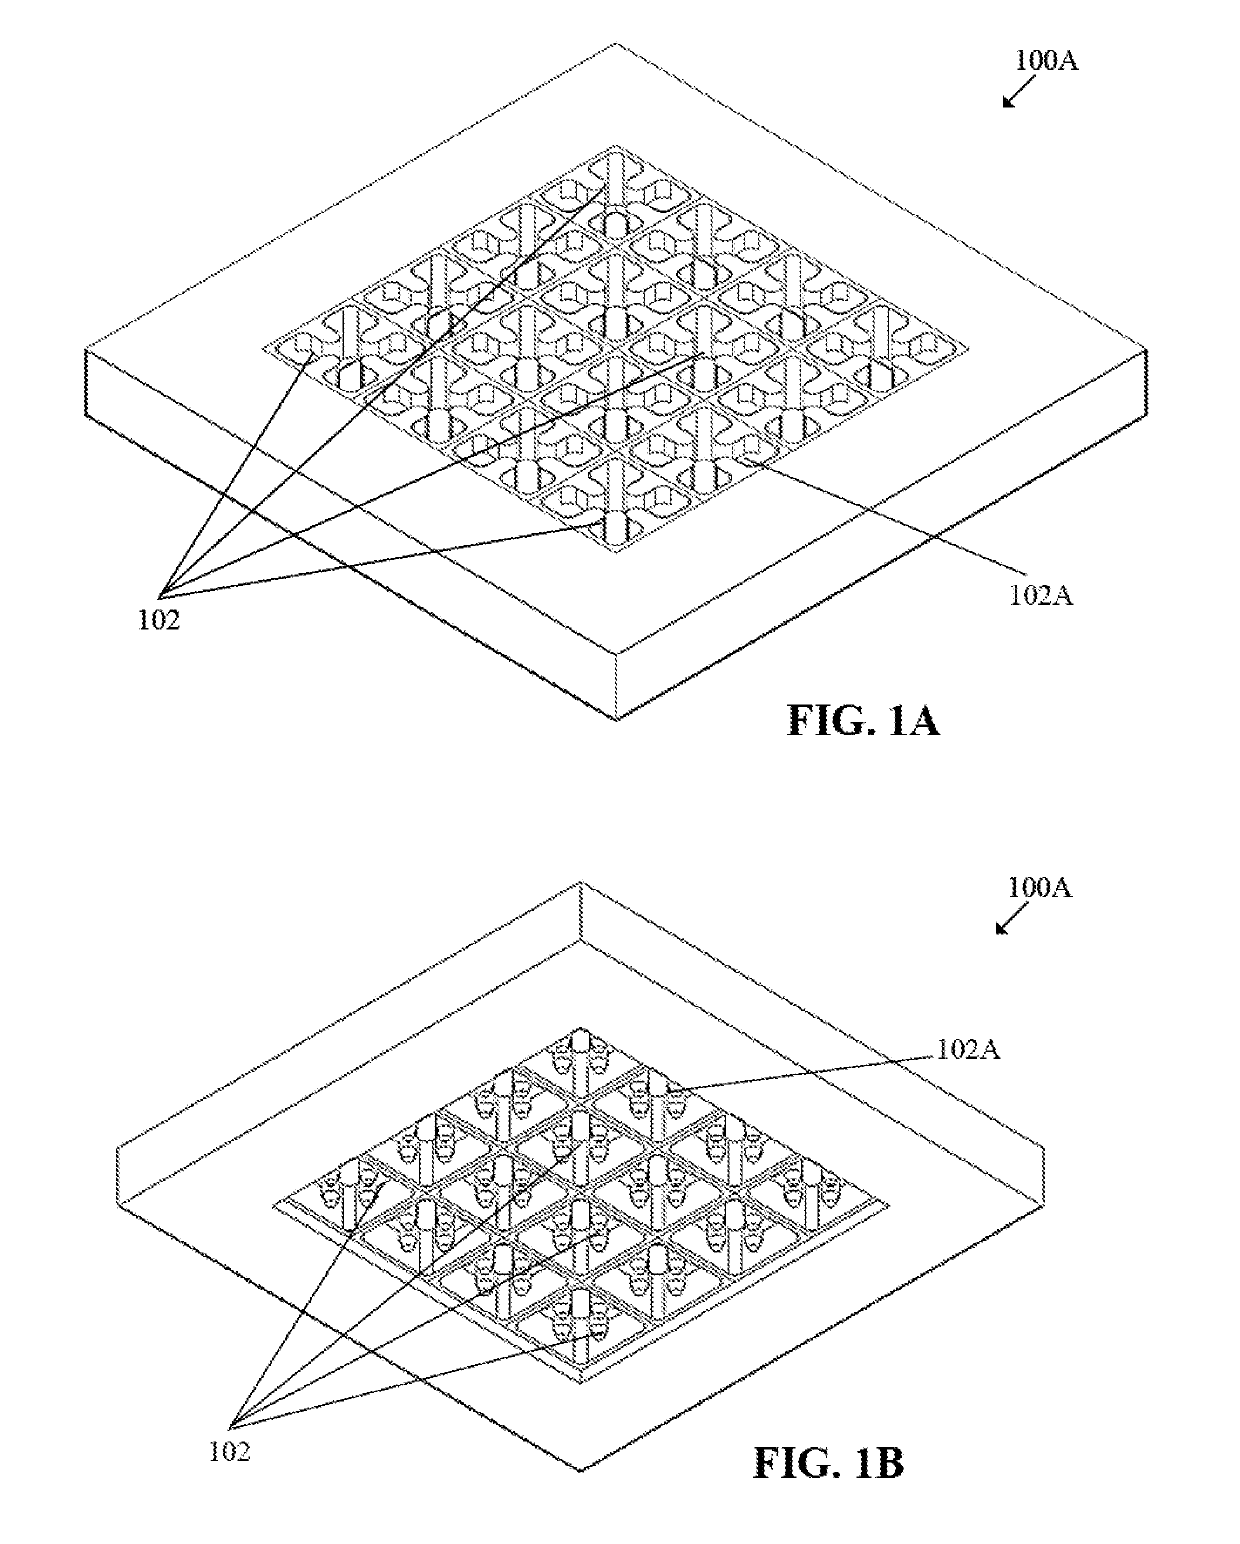 Waveguide antenna element based beam forming phased array antenna system for millimeter wave communication